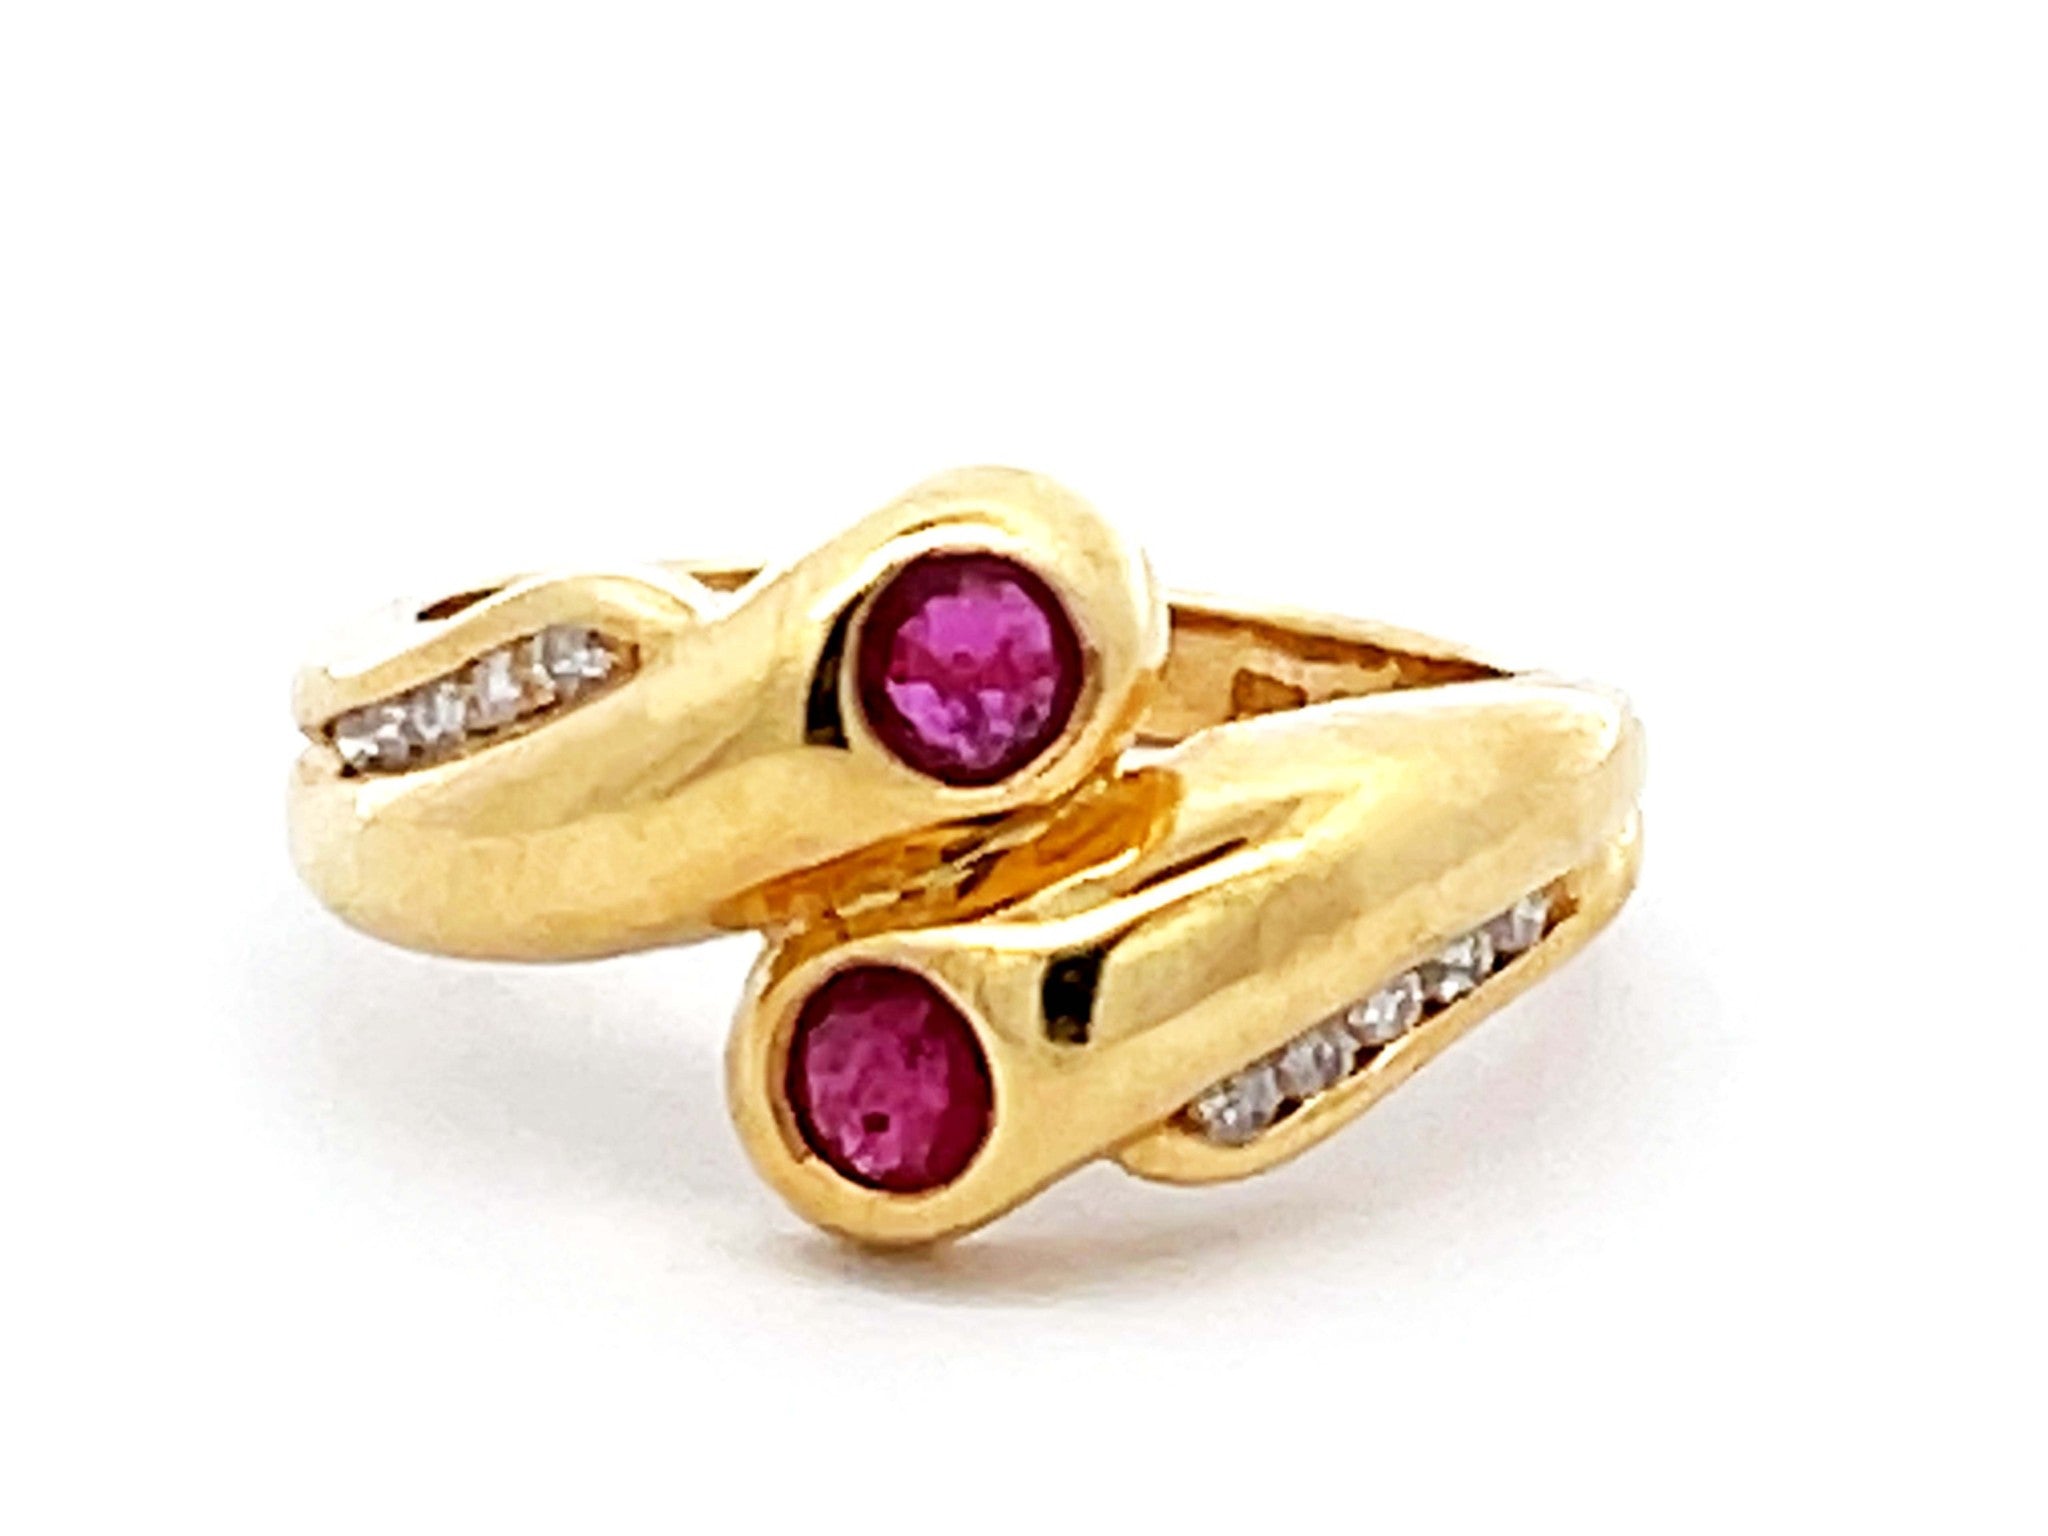 Vintage Ruby and Diamond Ring in 14k Yellow Gold